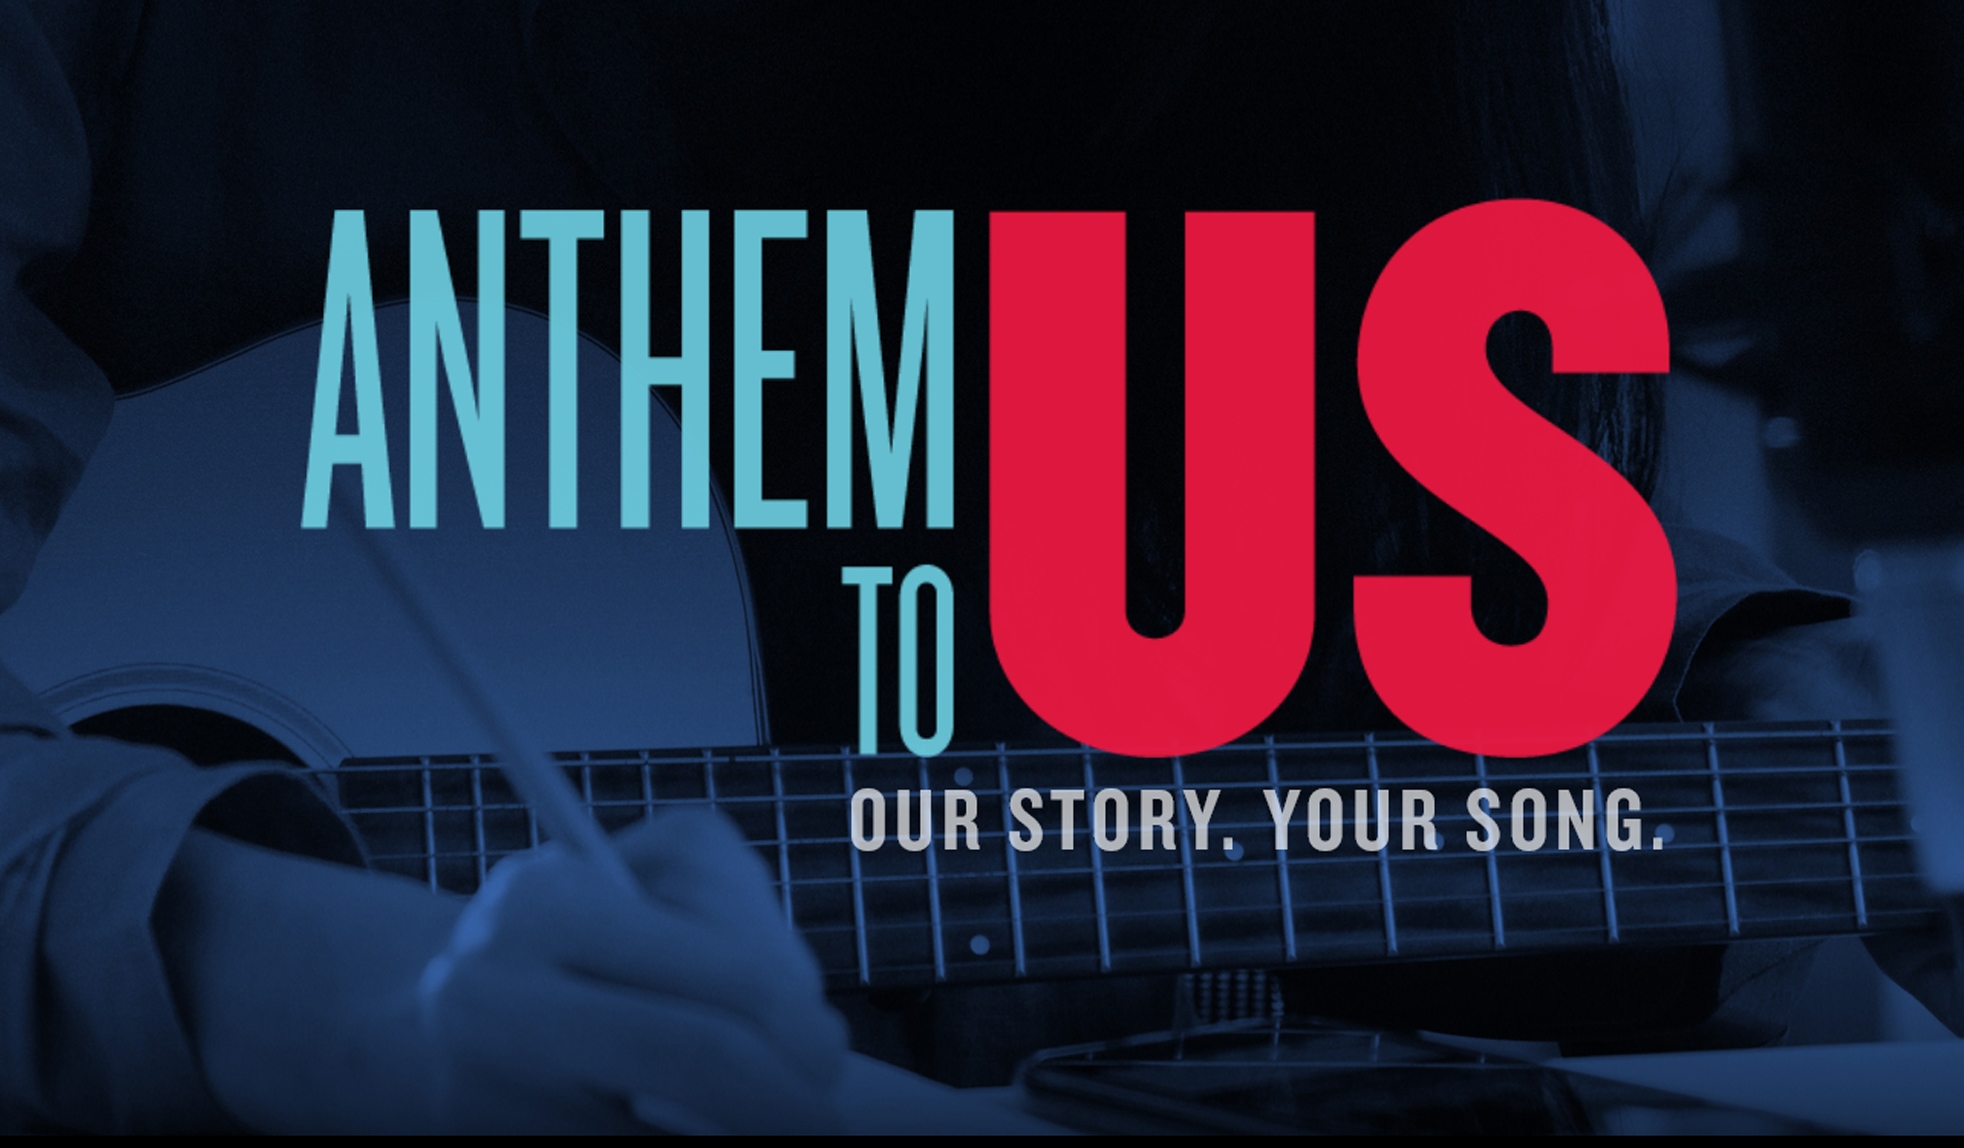 The Anthem to US finalists include a QPL composer! See their beautiful anthems performed LIVE at Lincoln Center.